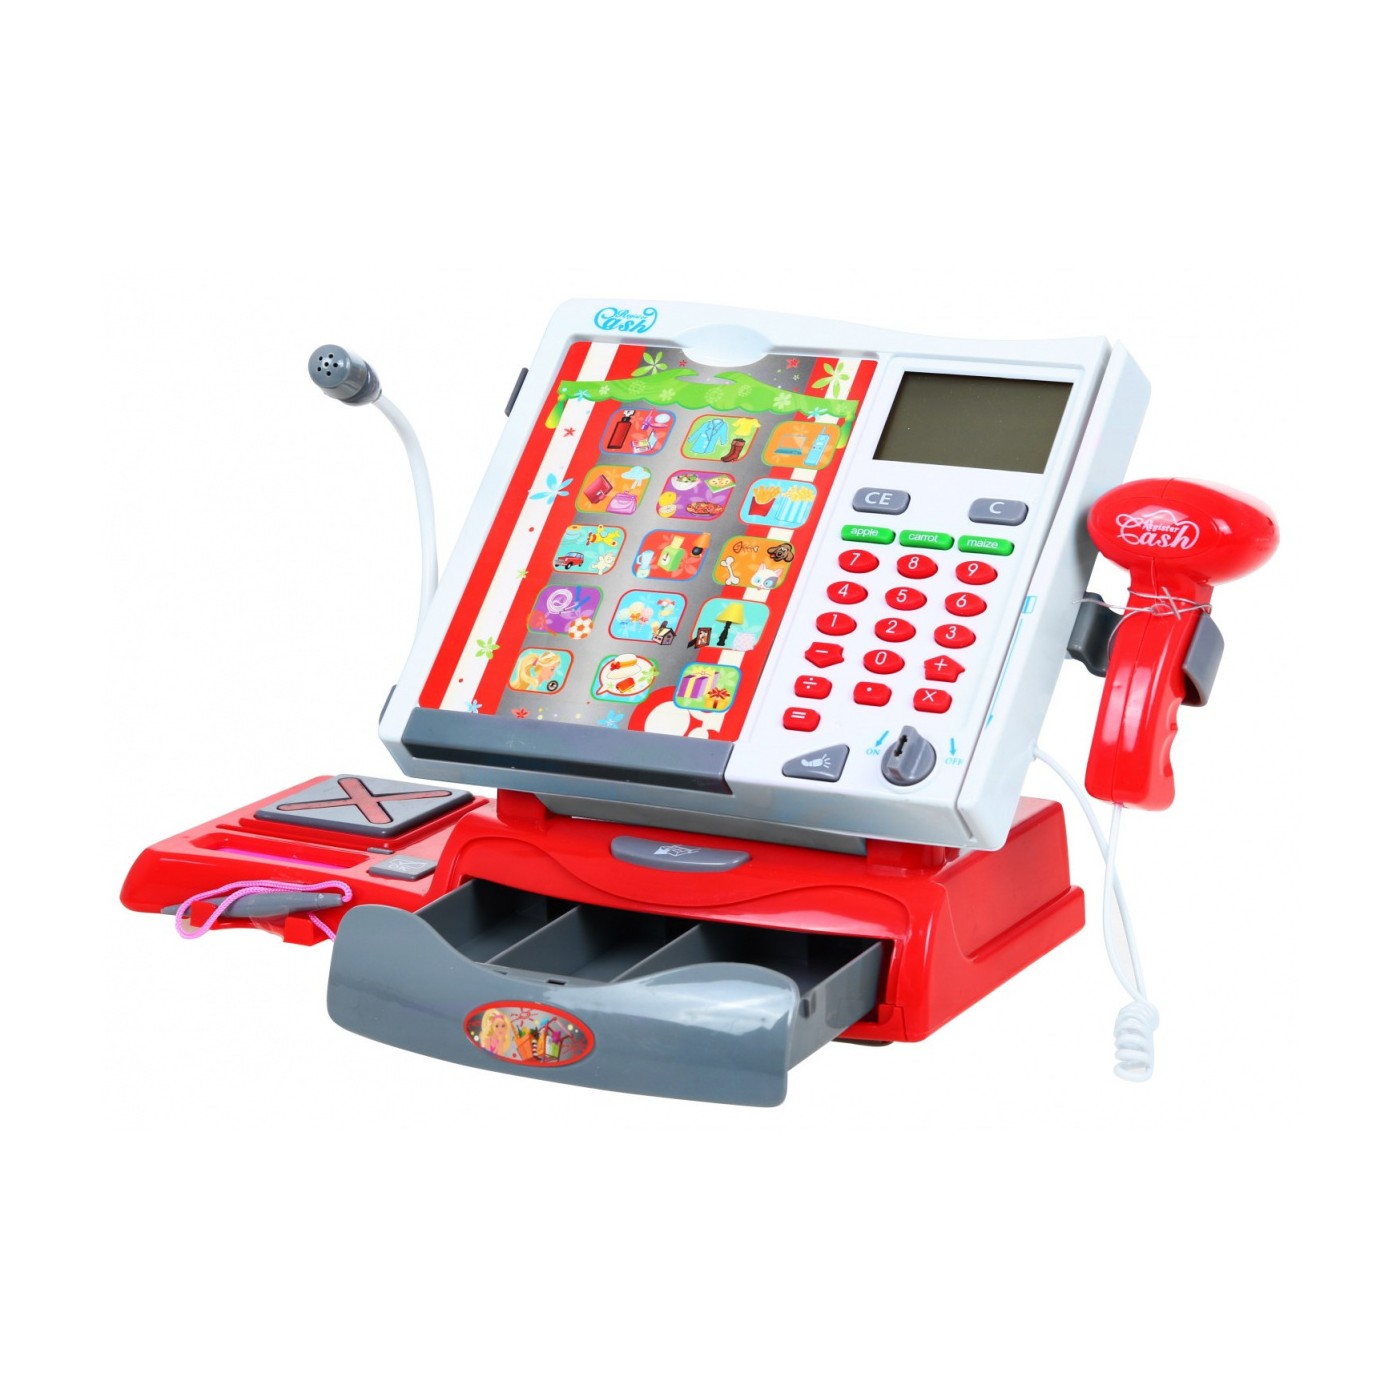 Safe from touch panel Accessories Red